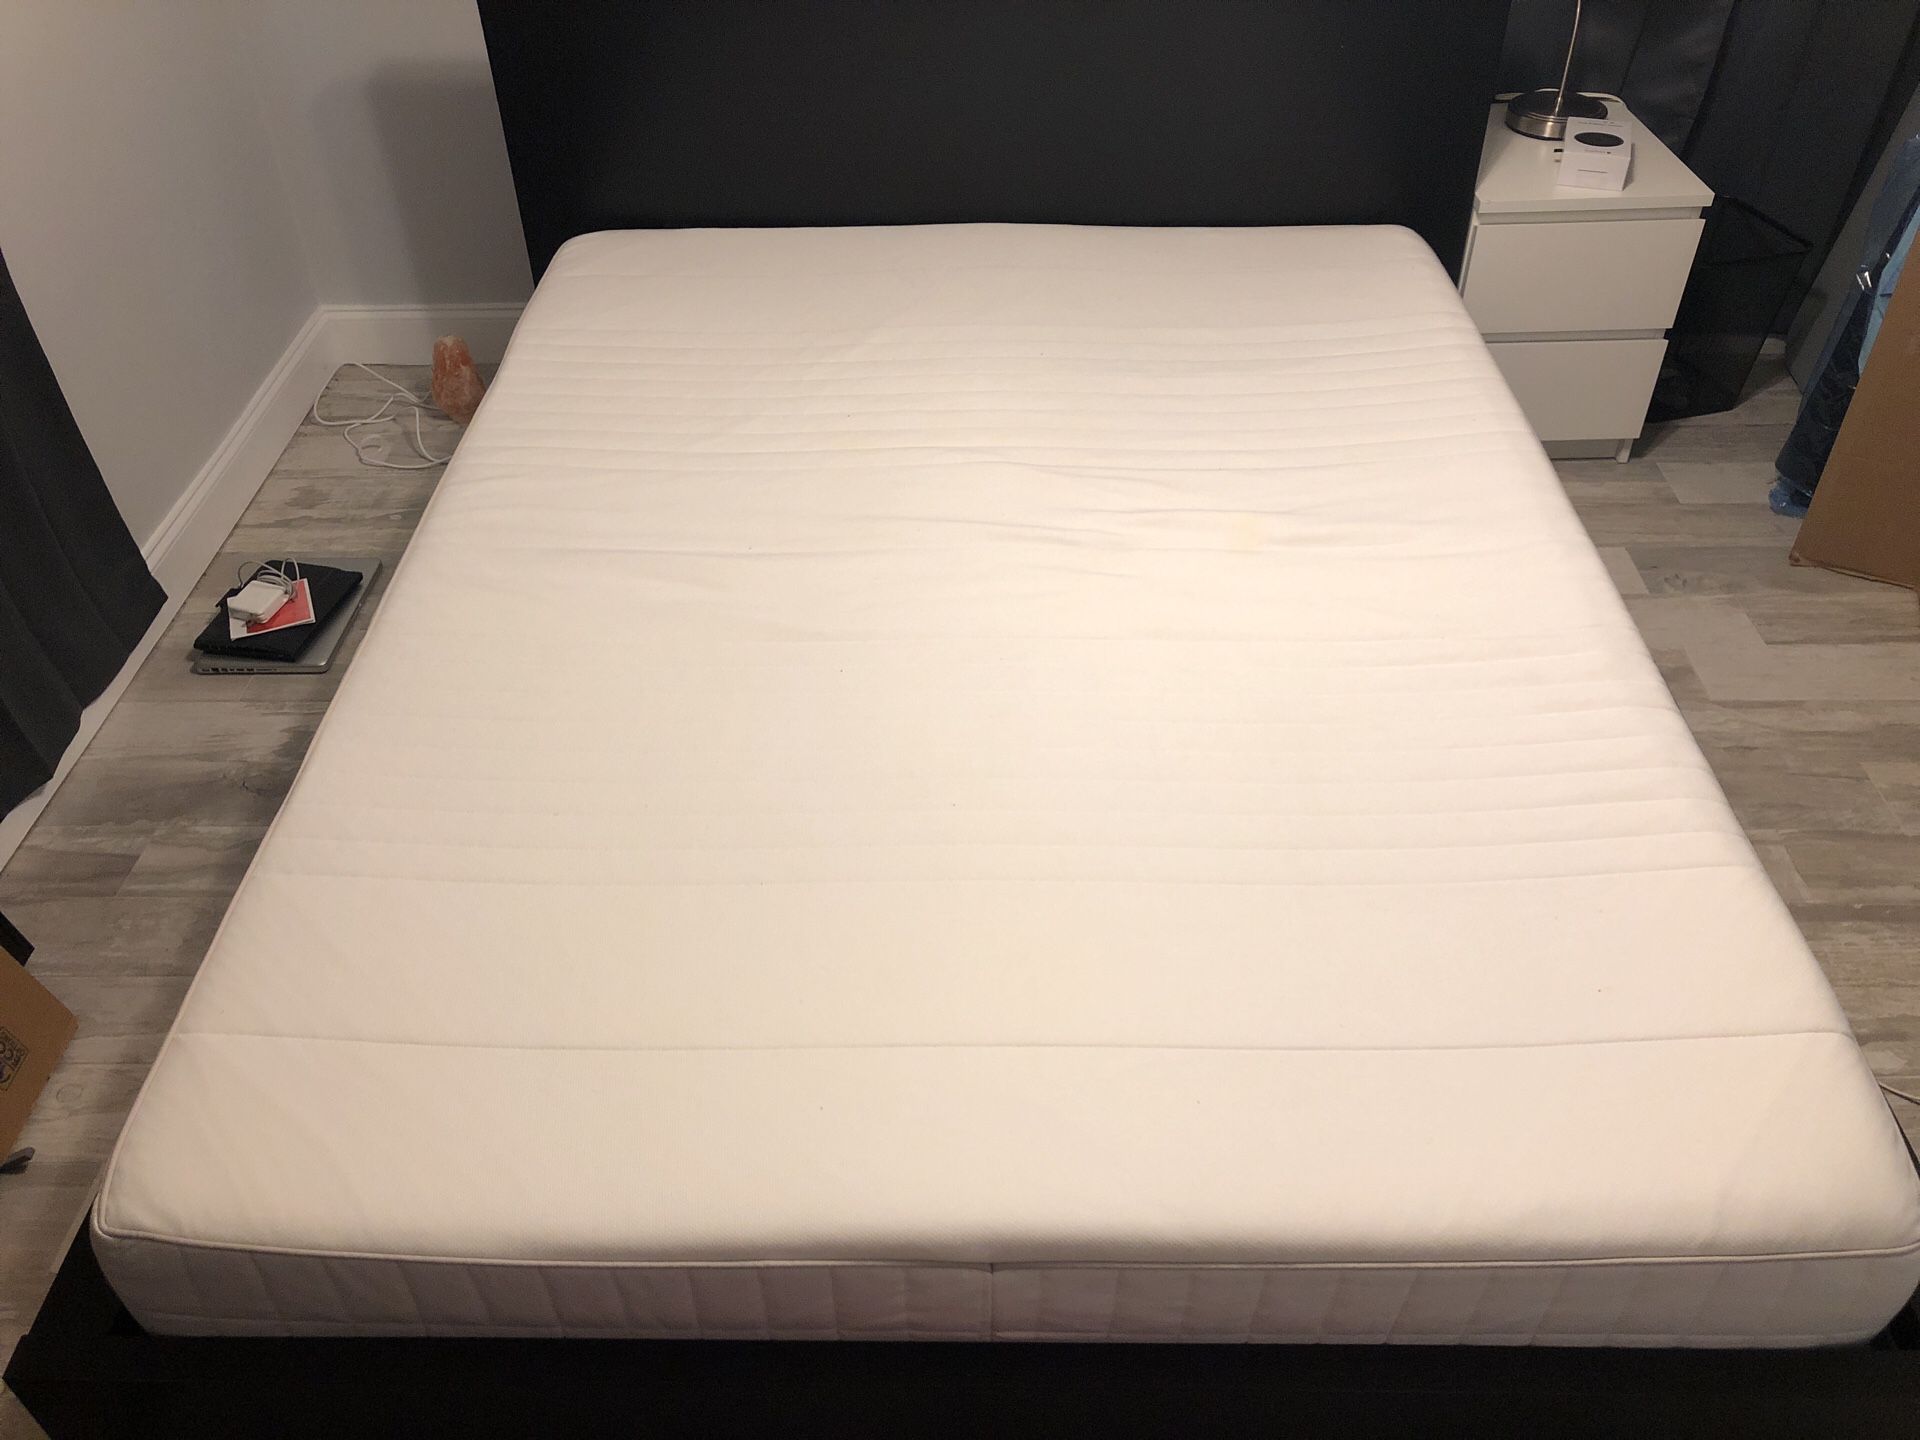 Cool used ikea bed frame Very Lightly Used Ikea Bed Frame And Myrbaka Queen Mattress For Sale In Lake Alfred Fl Offerup